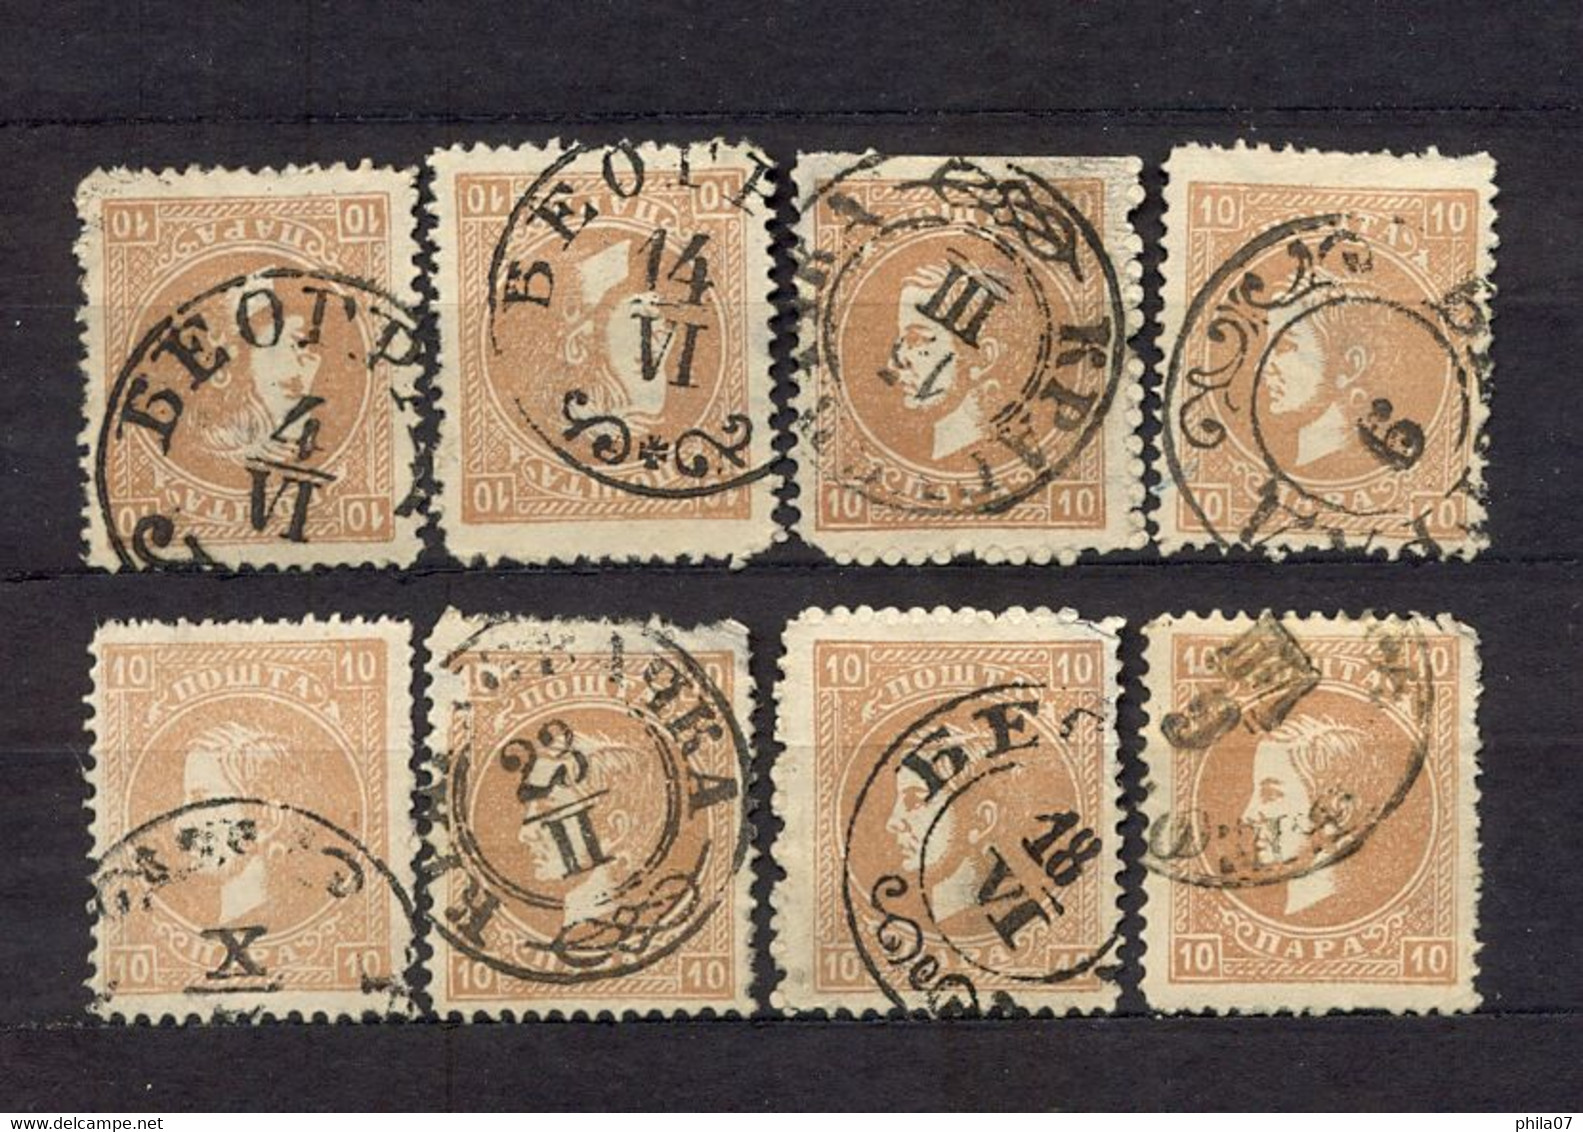 SERBIA - Lot Of Stamps 10 Para With Nice Cancels. - Serbie